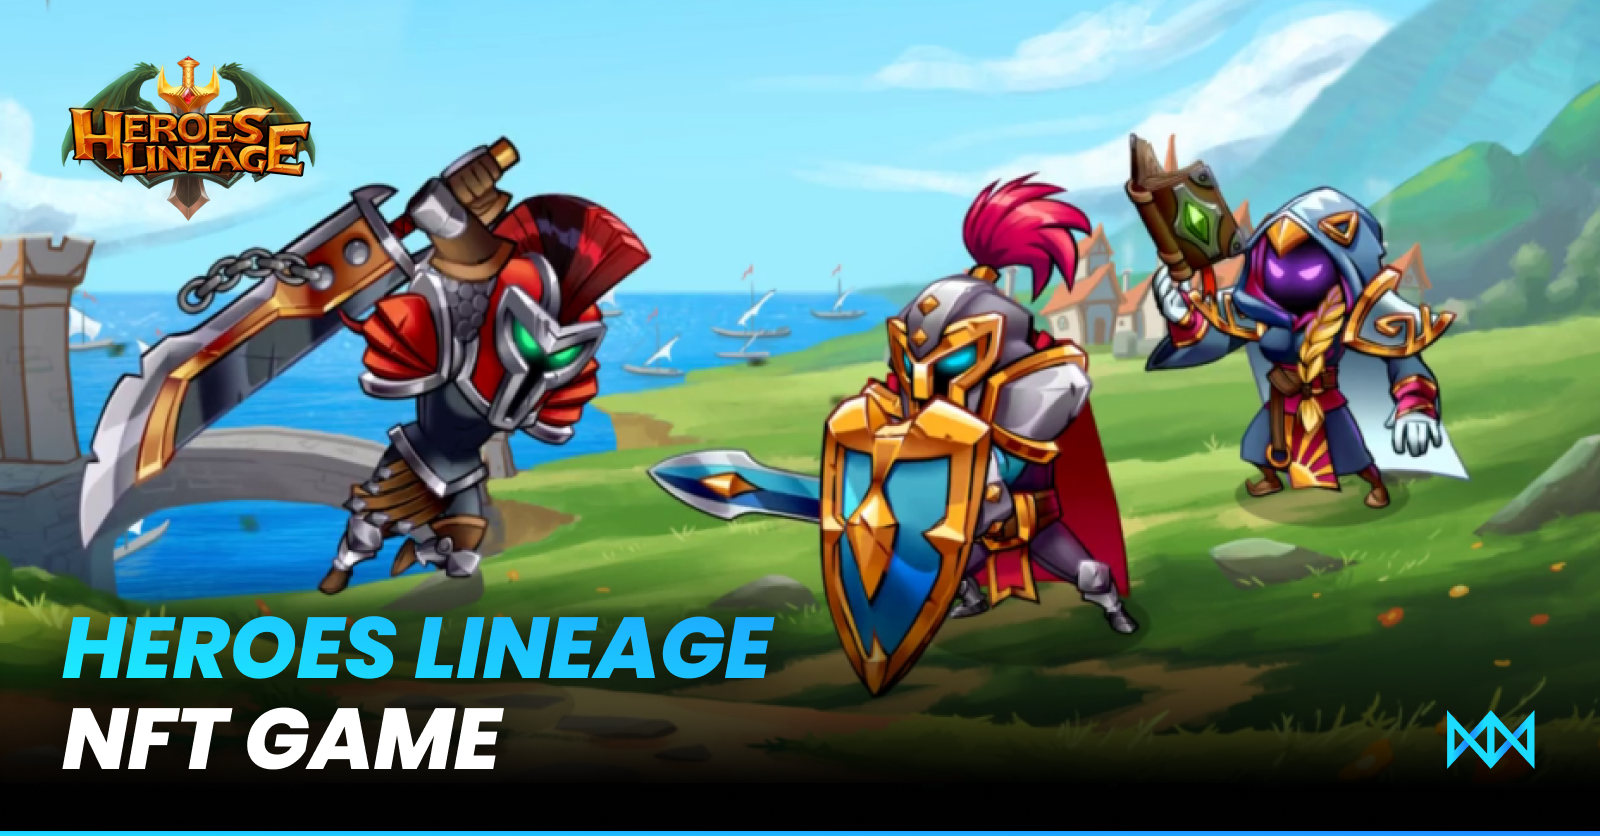 Heroes Lineage: The Coolest Multiplayer NFT Game of 2022